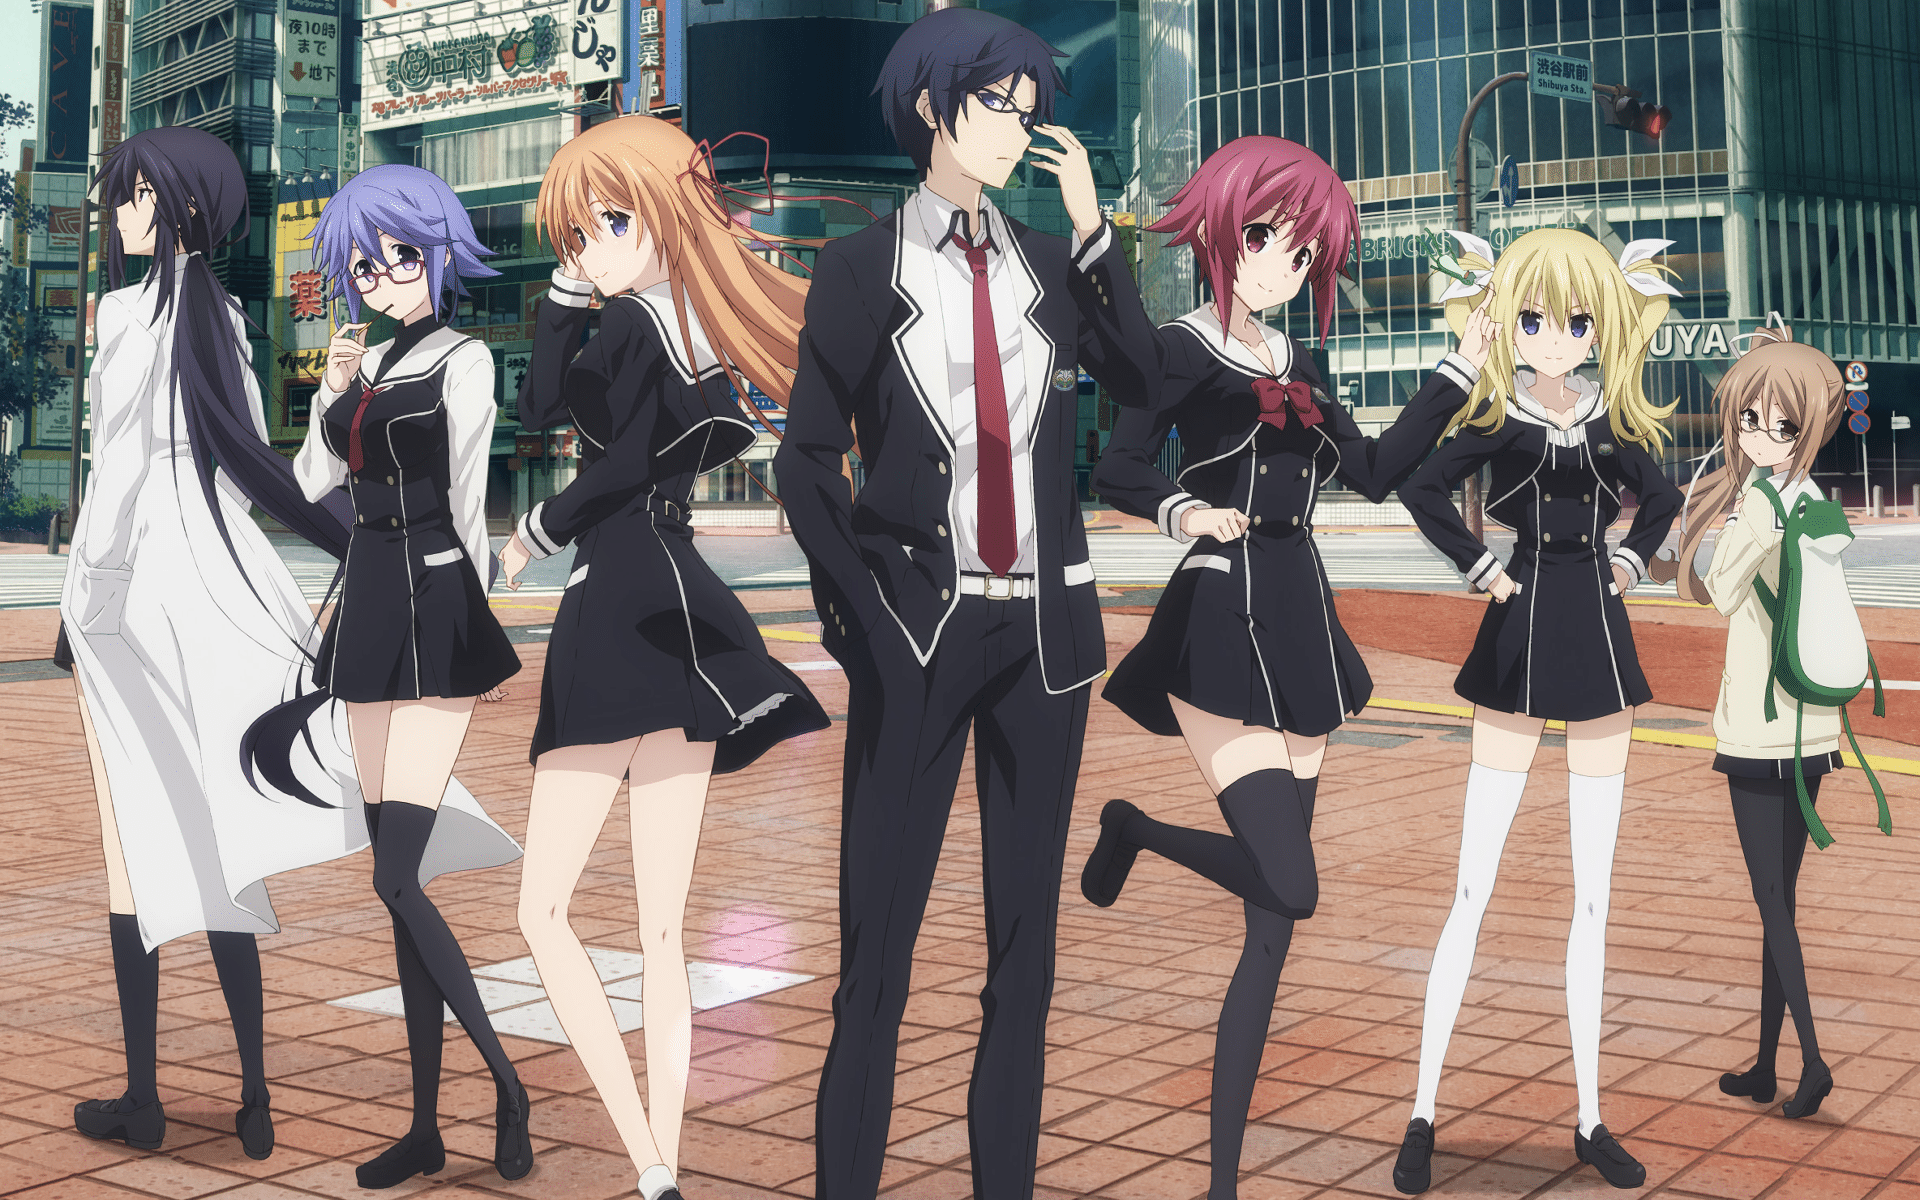 Chaos;Child Shares Brief Japan Nintendo Switch Pre-Order Trailer